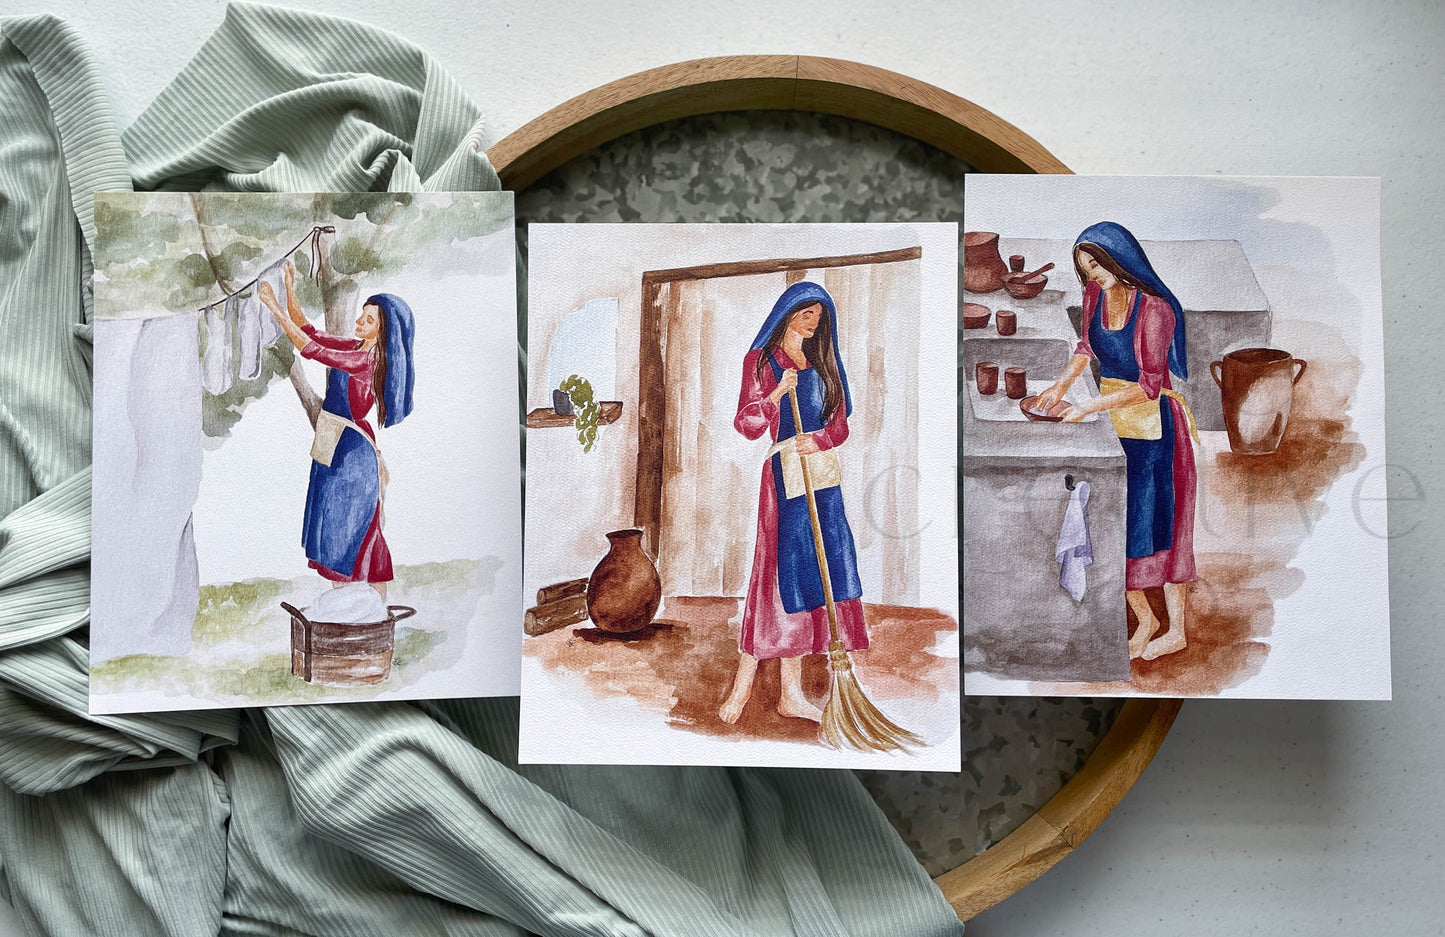 Mary's Work, Dishes | Print